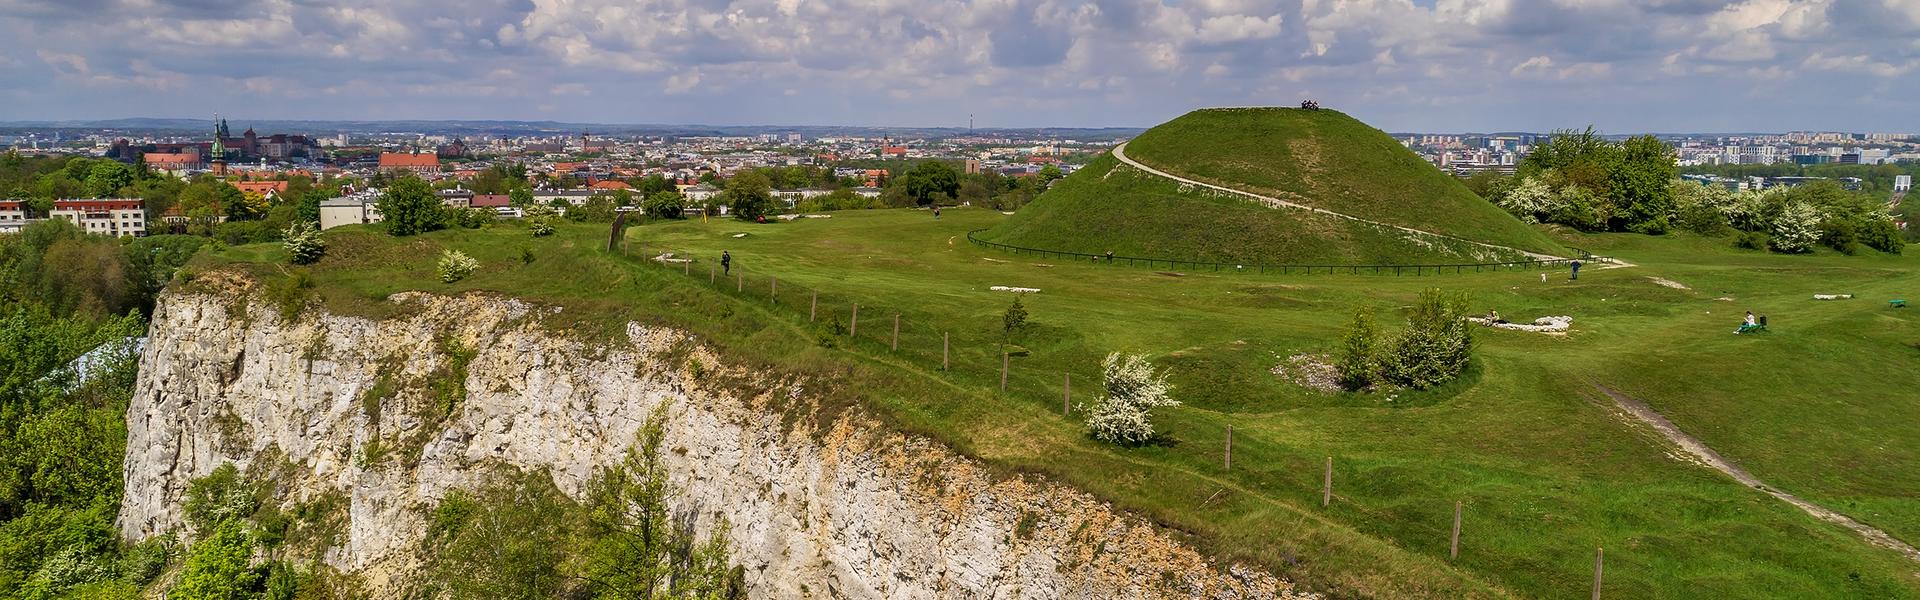 A large, green earth mound, in the background a view of Krakow.